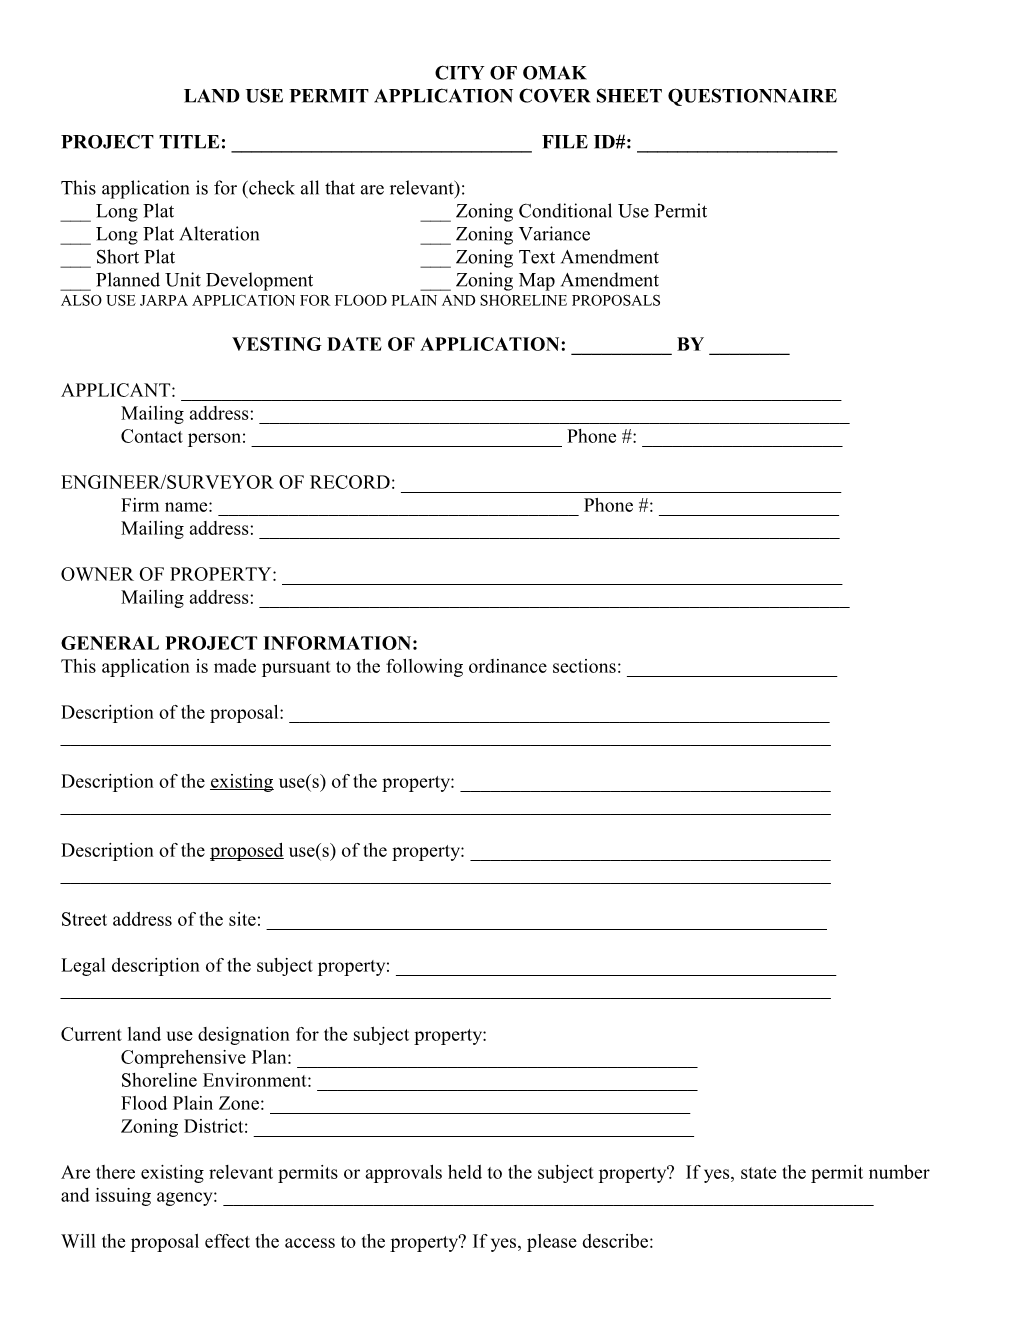 Land Use Permit Application Cover Sheet Questionnaire